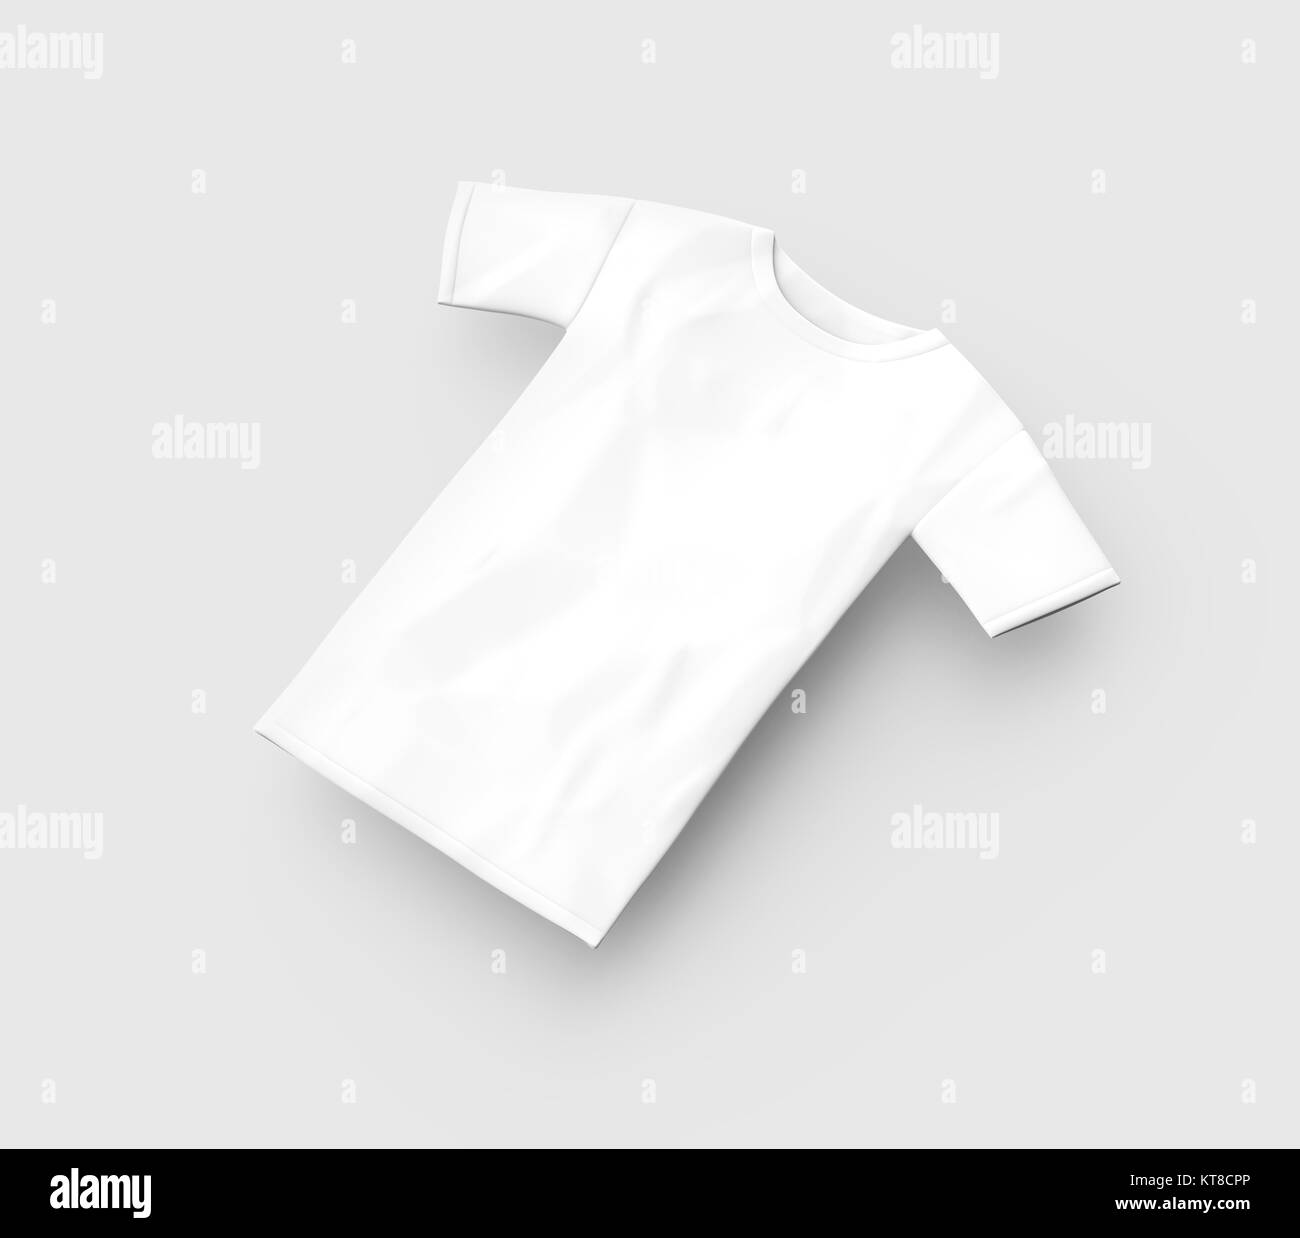 T shirt mockup, blank white unisex cloth template isolated on light gray background, 3d render elevated view Stock Photo